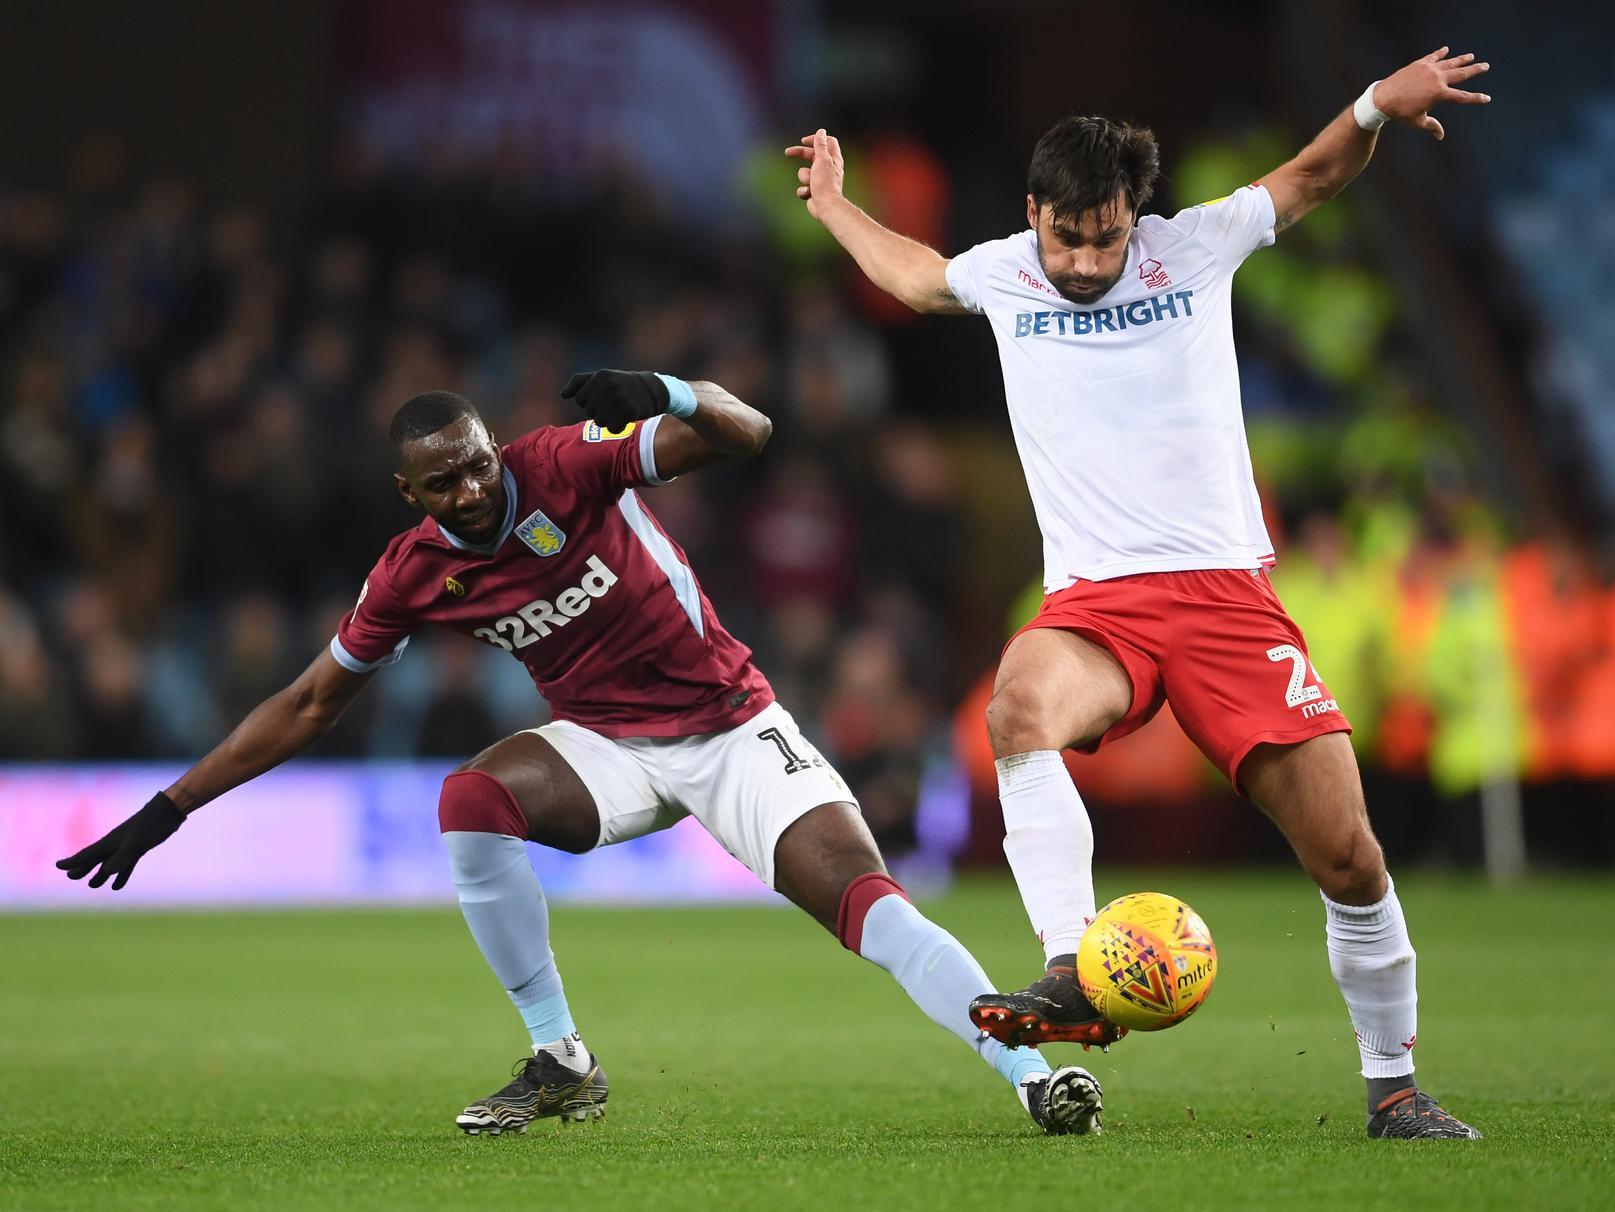 Nottingham Forest have confirmed that veteran midfielder Claudio Yacob has left the club by mutual consent, after not playing a single game for the club over the past ten months. (Nottingham Post)